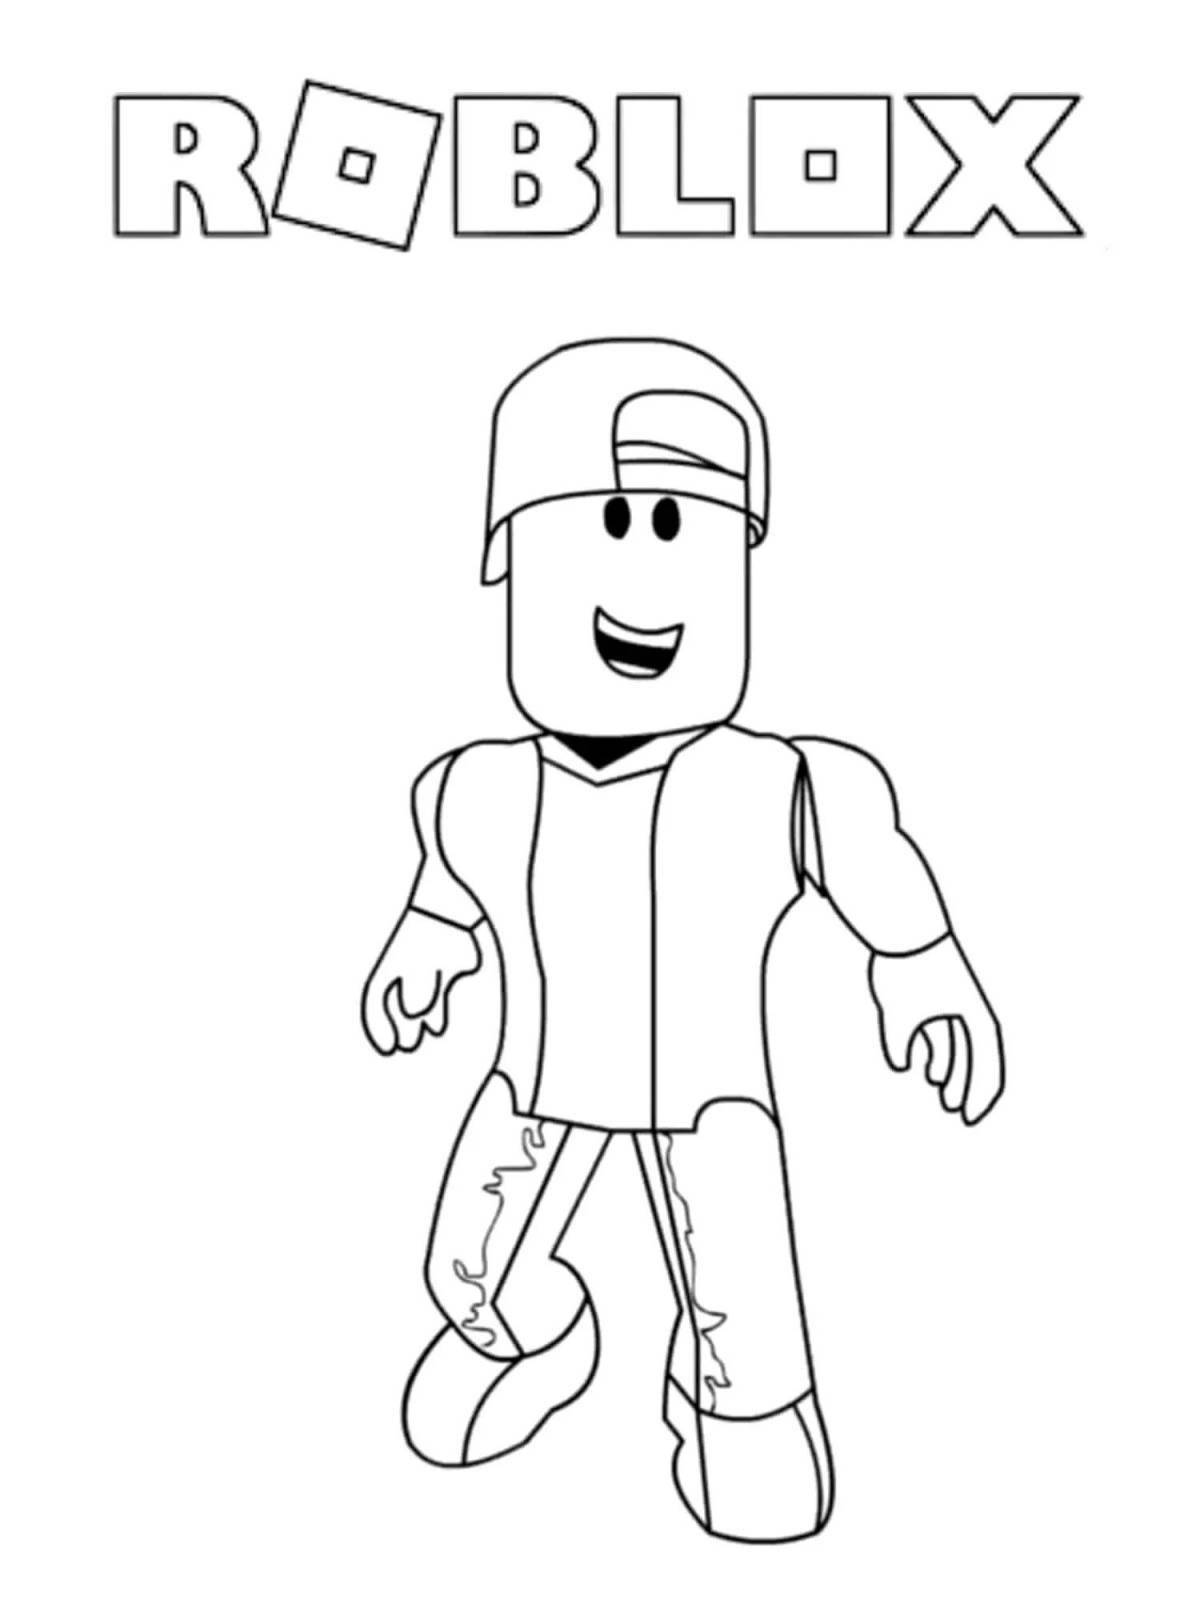 Outstanding coloring rainbow friends roblox for boys